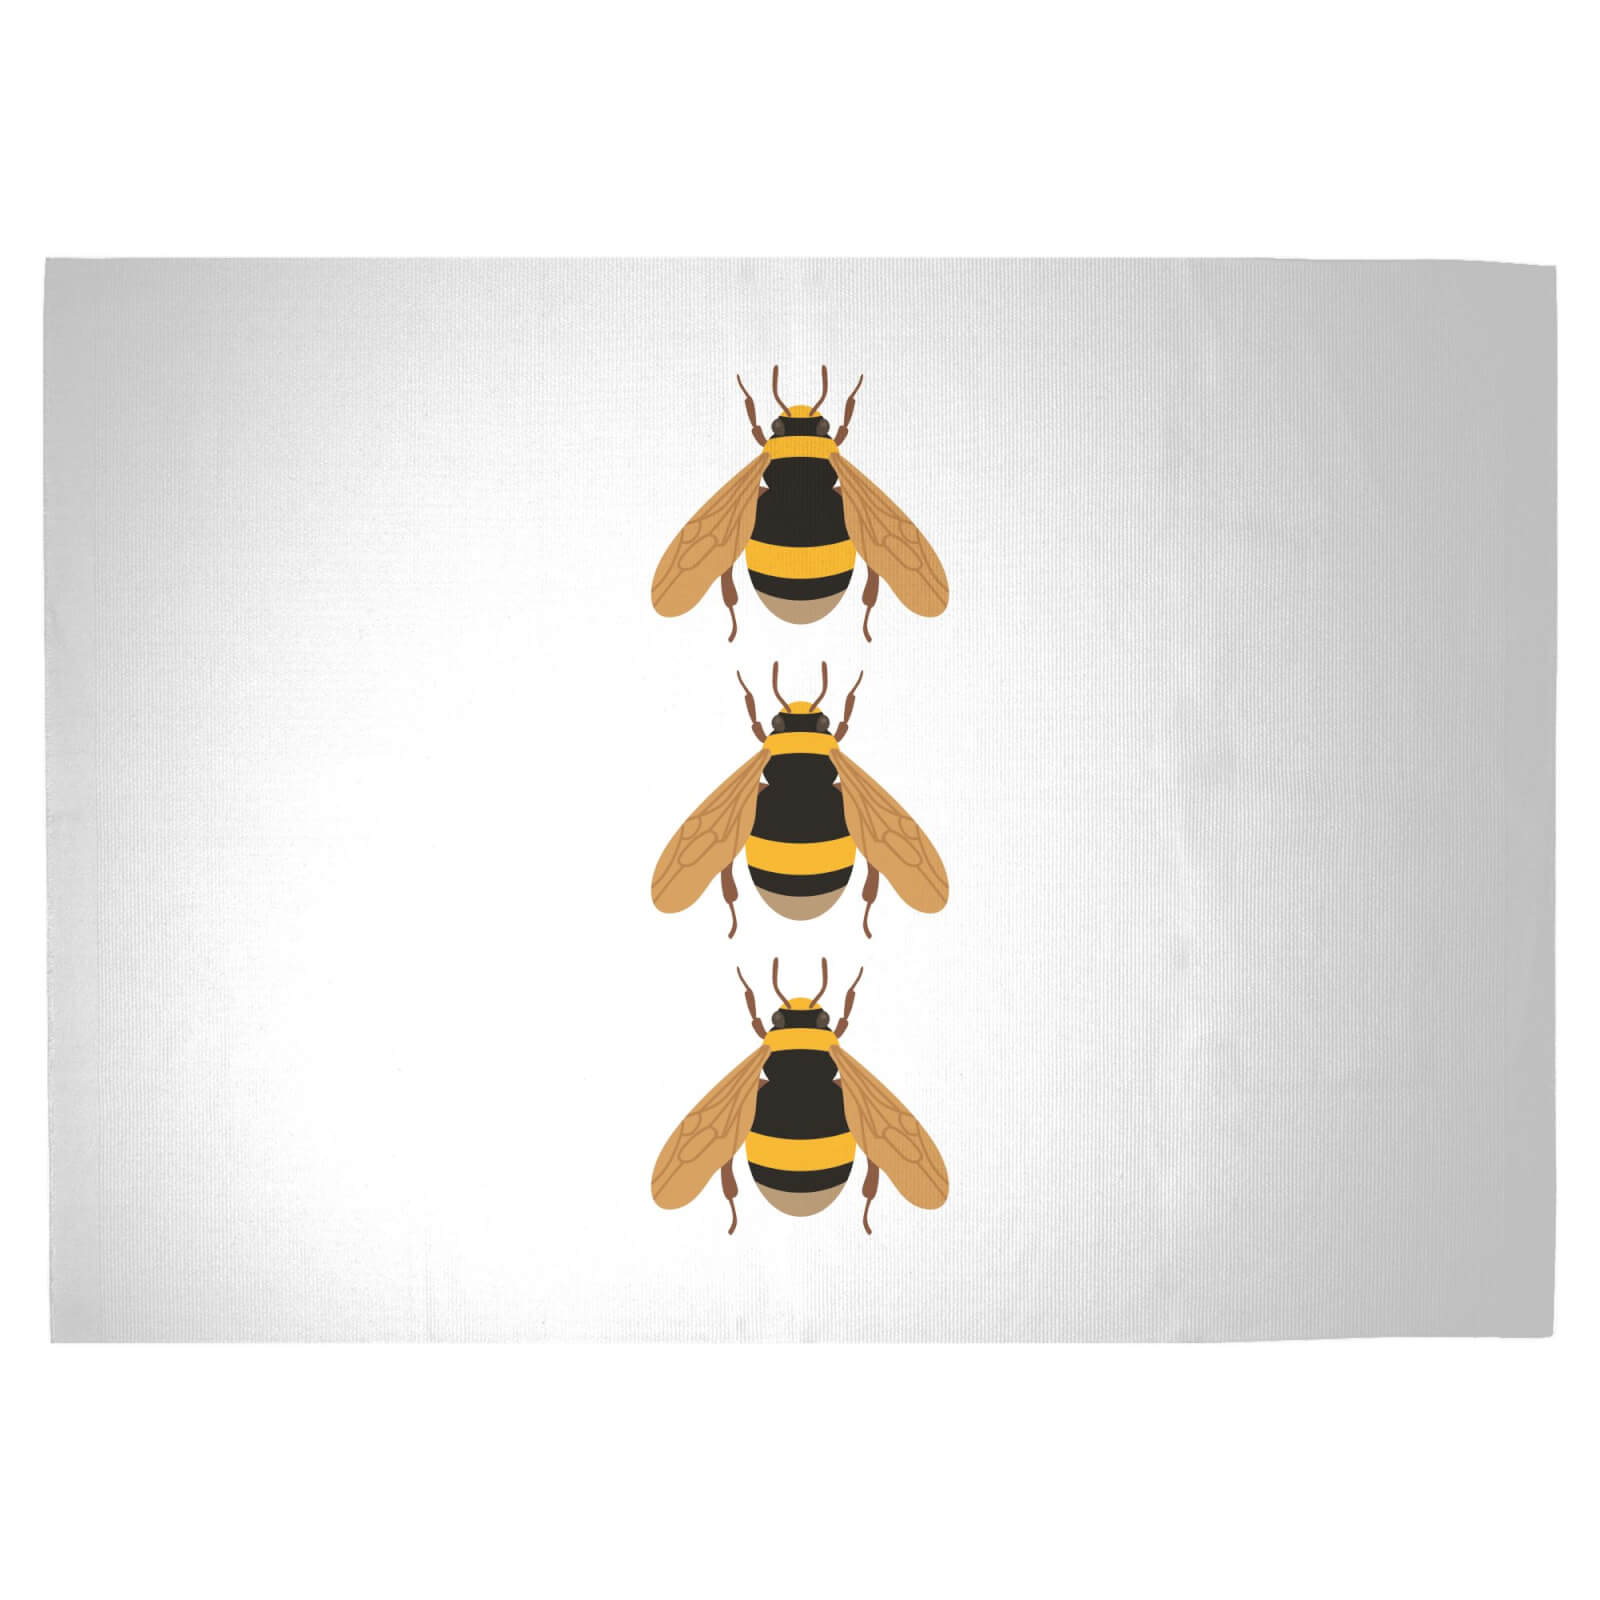 Triple Bees Woven Rug - Large